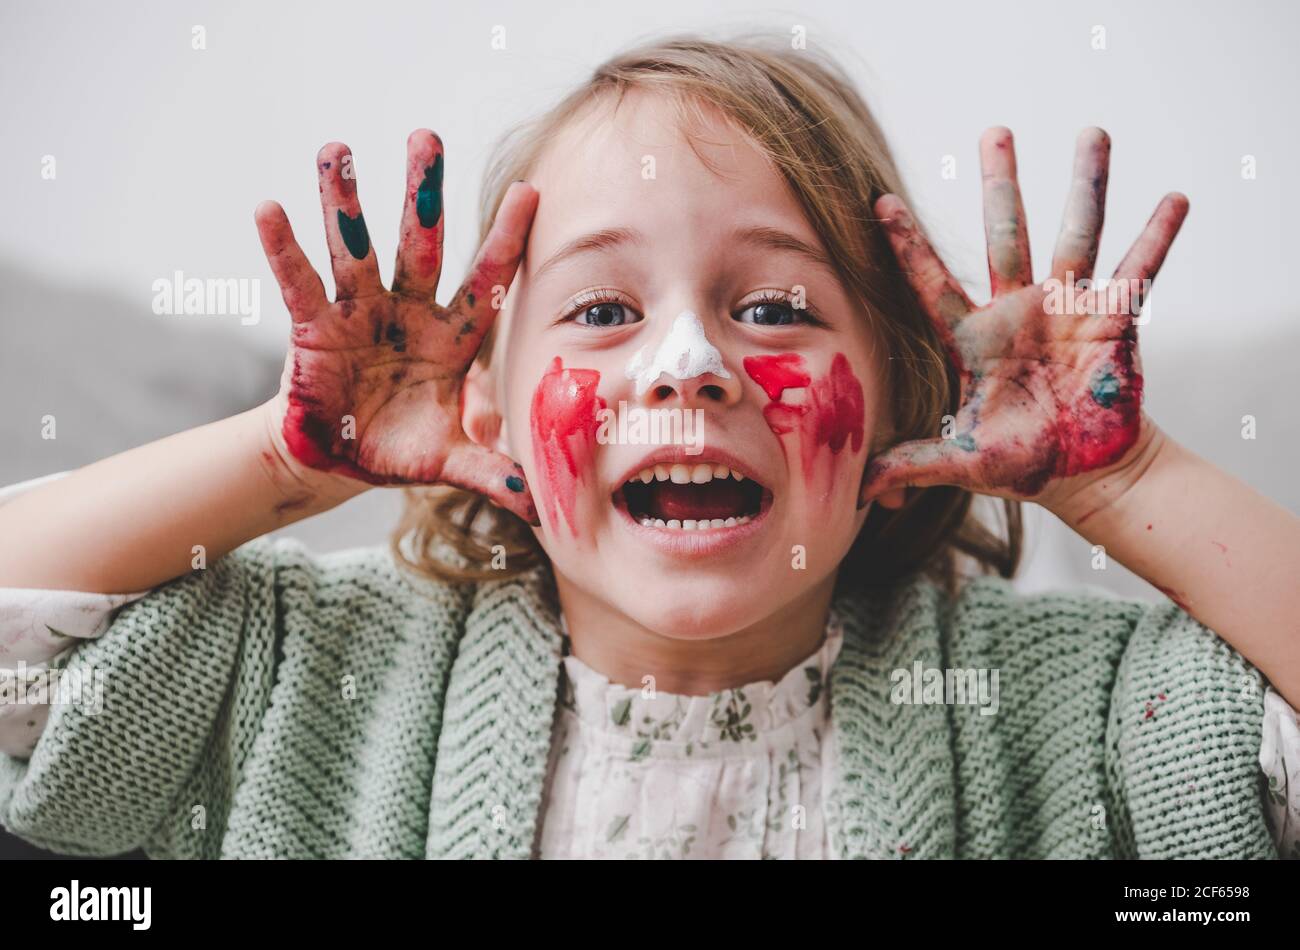 girl with dirty hands coloring face Stock Photo